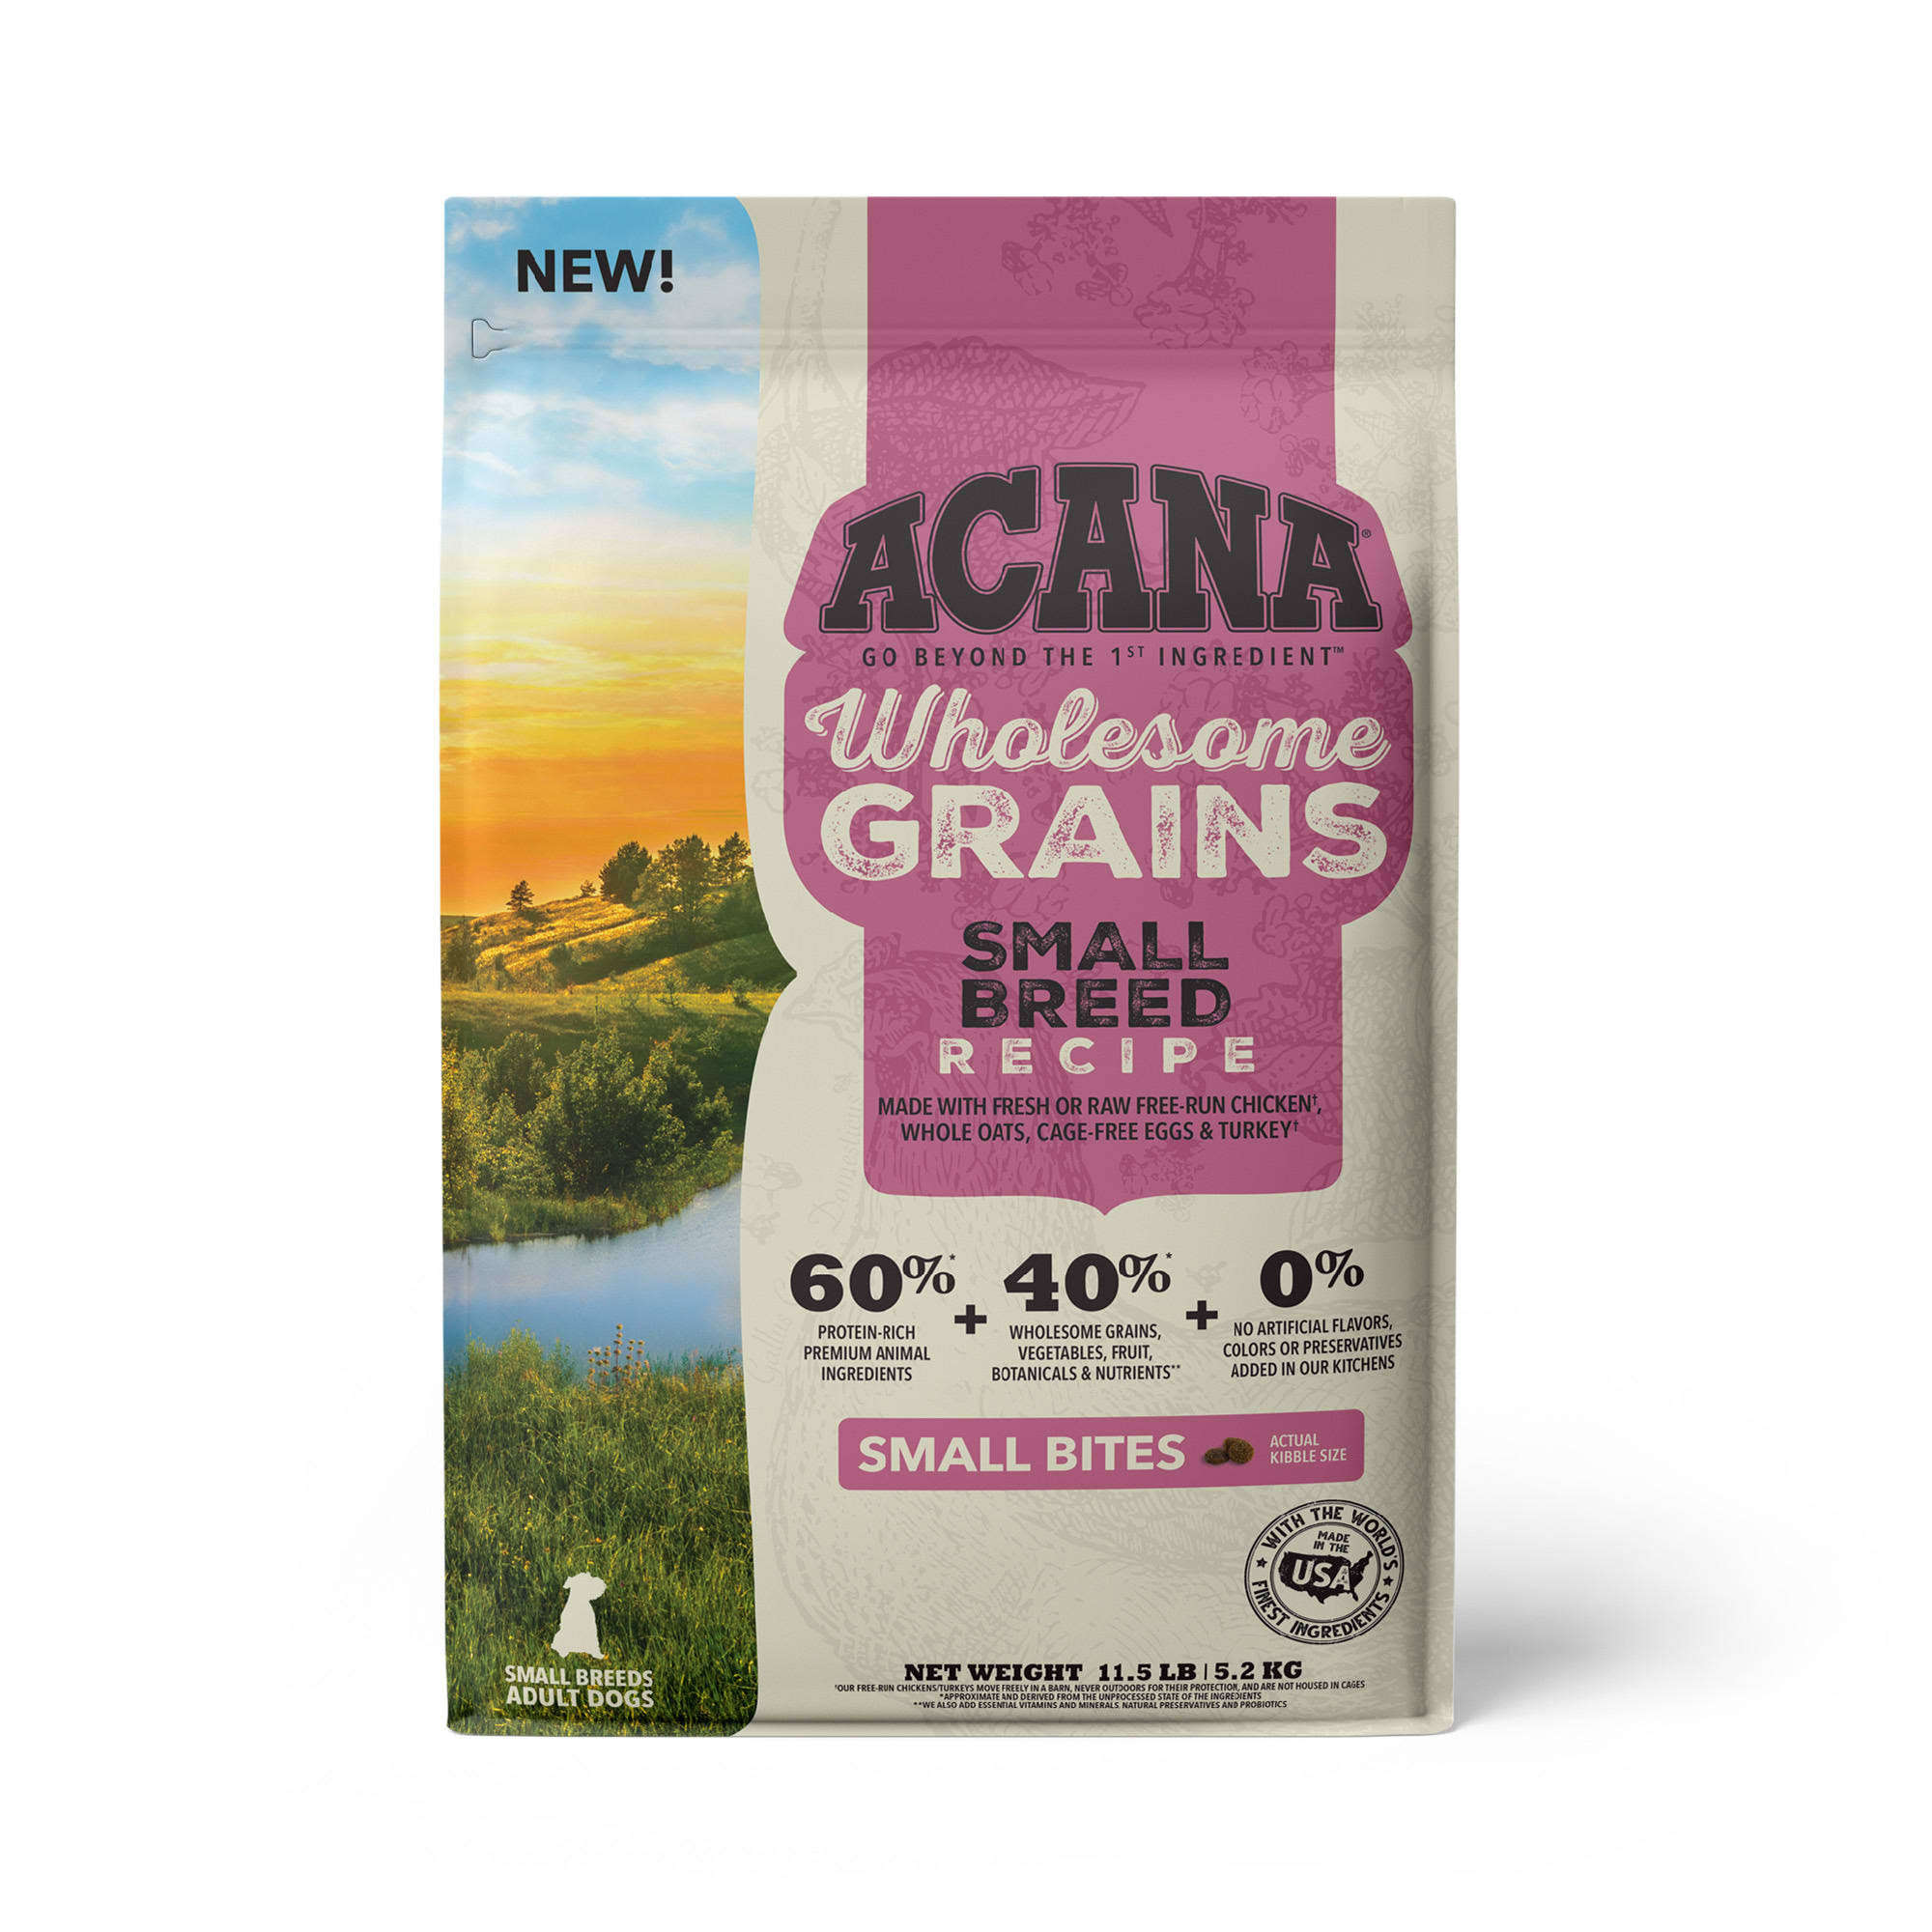 ACANA Wholesome Grains Small Breed Recipe Dry Dog Food - 11.5 lb